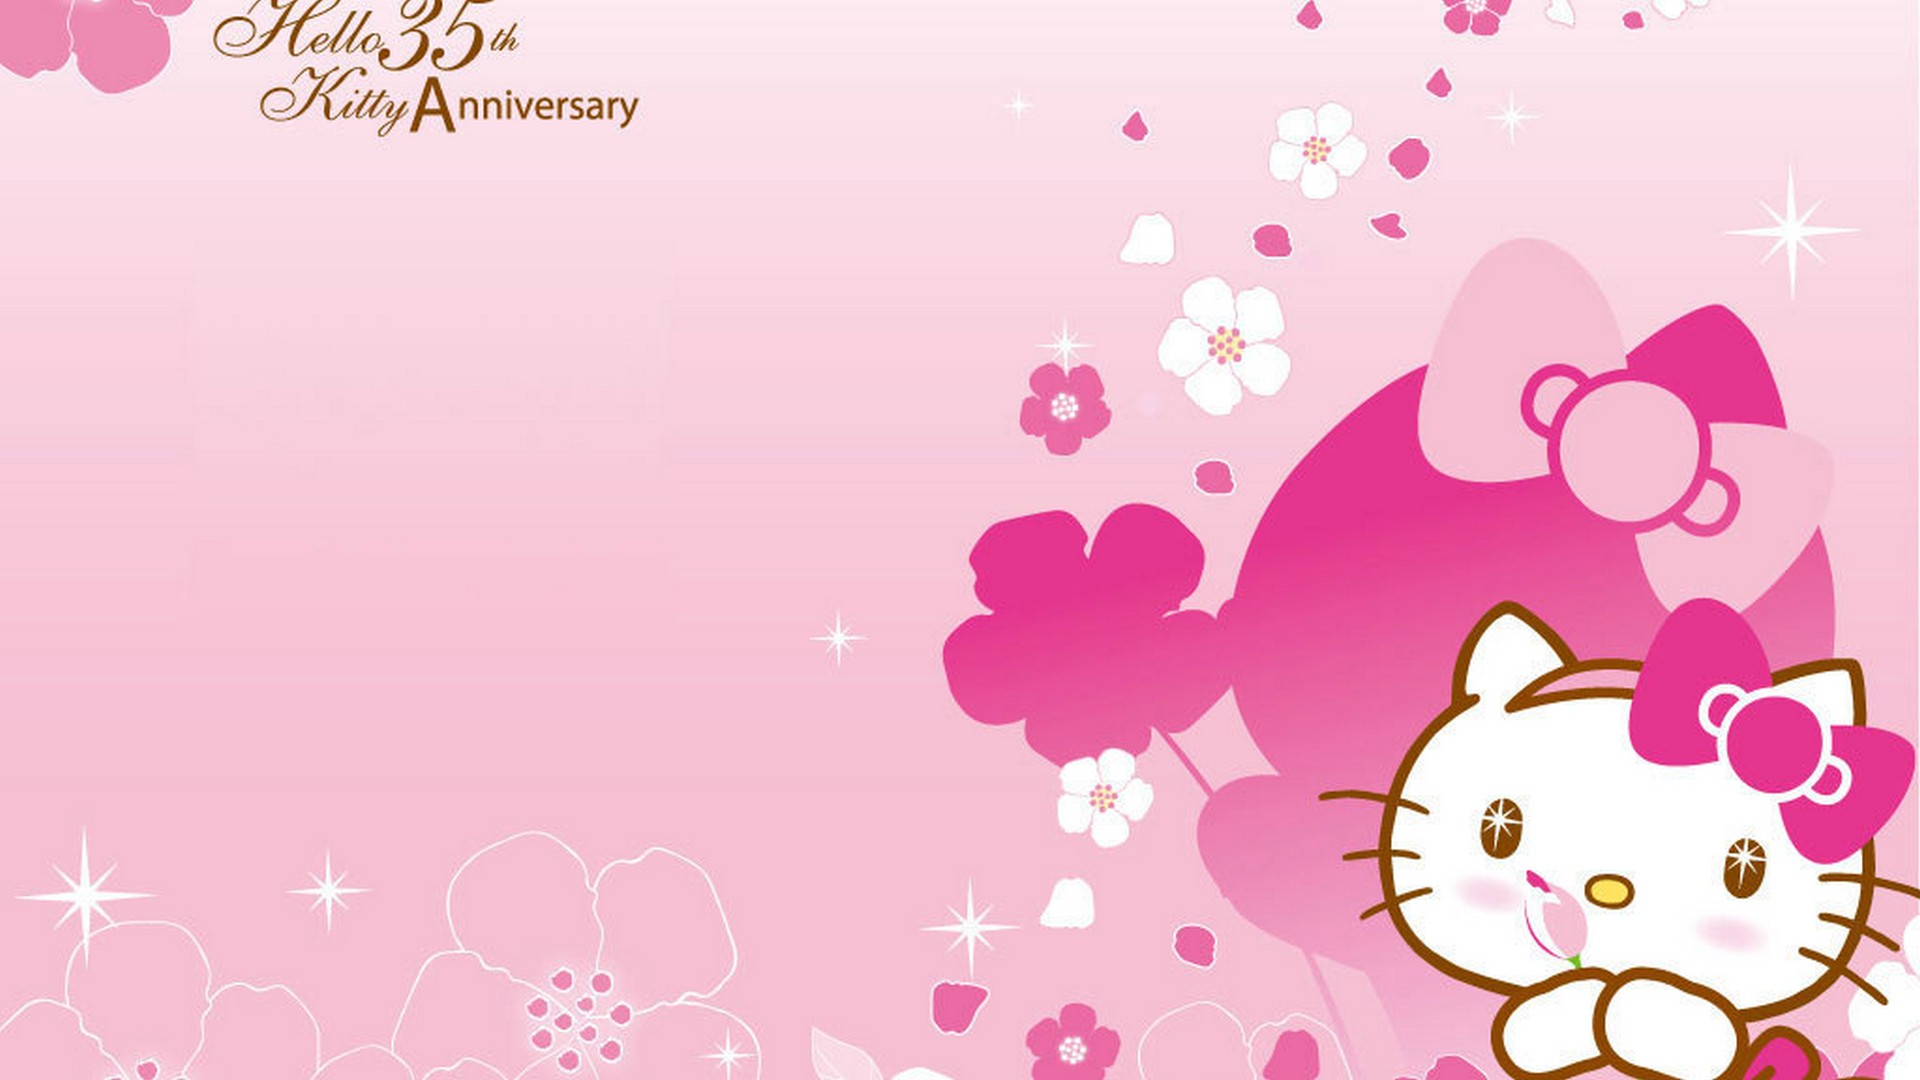 Hello Kitty Desktop Backgrounds HD with resolution 1920X1080 pixel. You can use this wallpaper as background for your desktop Computer Screensavers, Android or iPhone smartphones